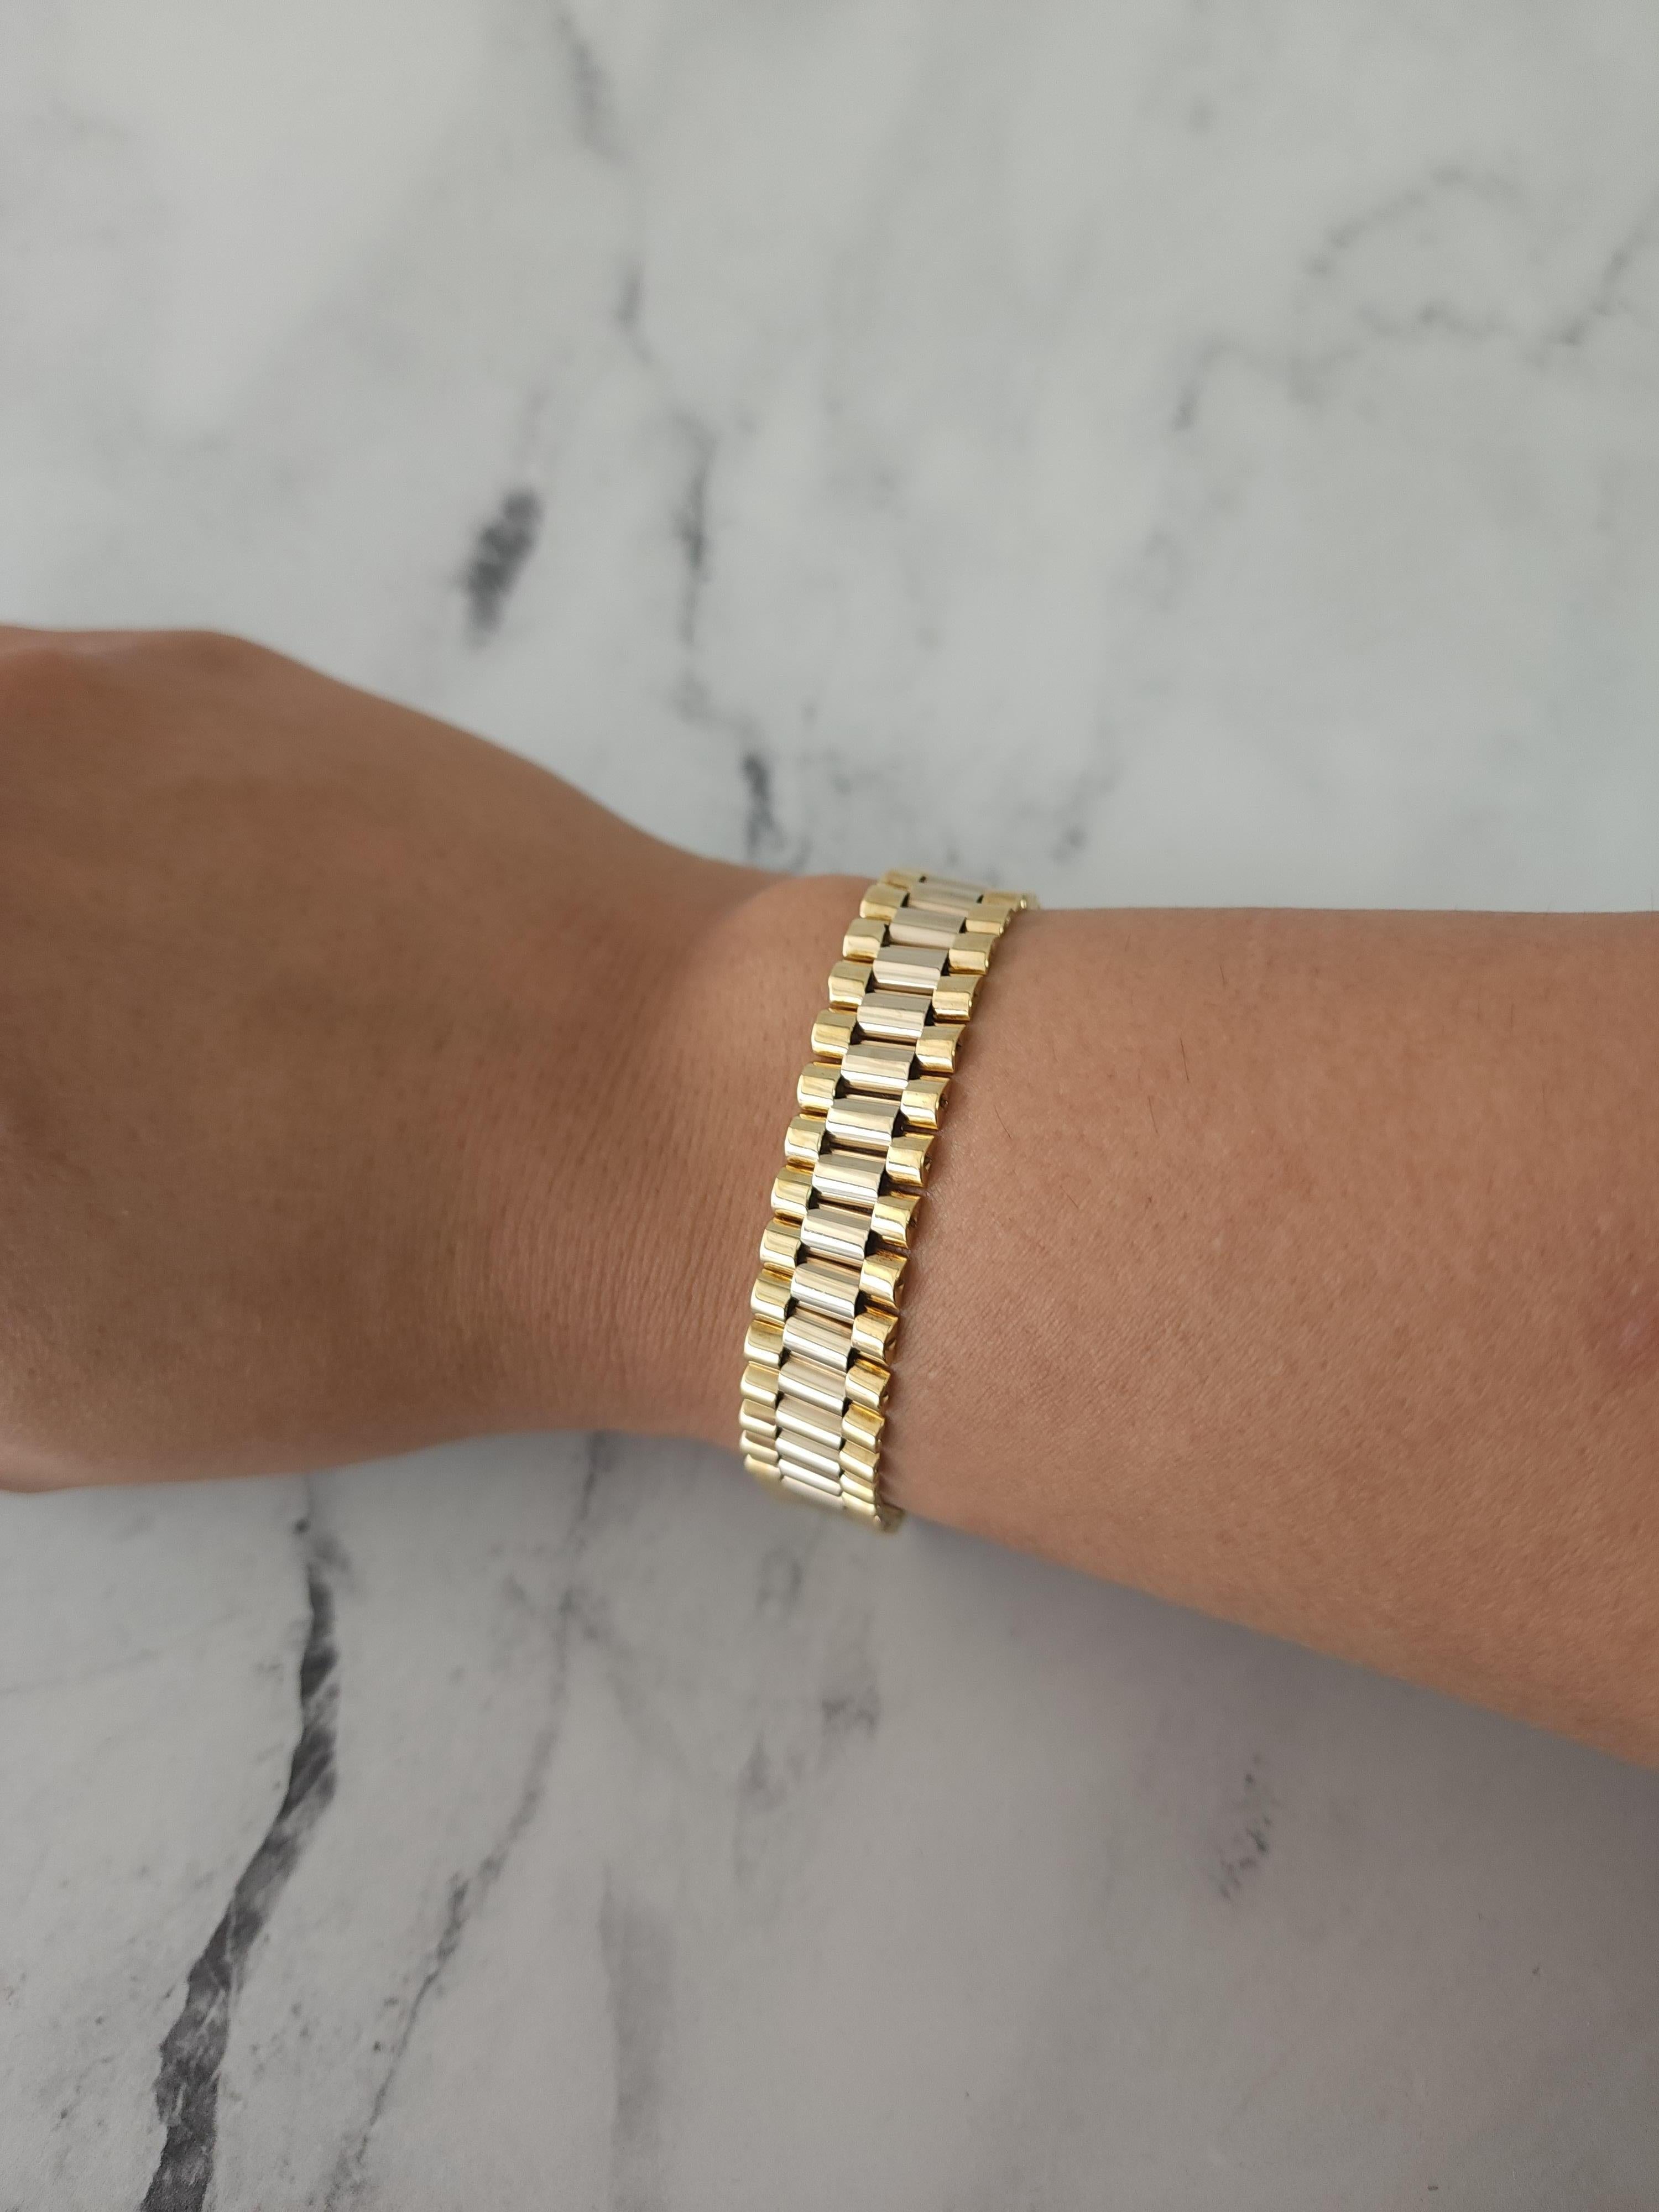 ♥ Product Summary ♥

Details: Presidential Style Two-Toned Bracelet
Metal: 14k Two-Toned Gold 
Weight: 26 grams 
Length: 8 inches
Width: 13mm